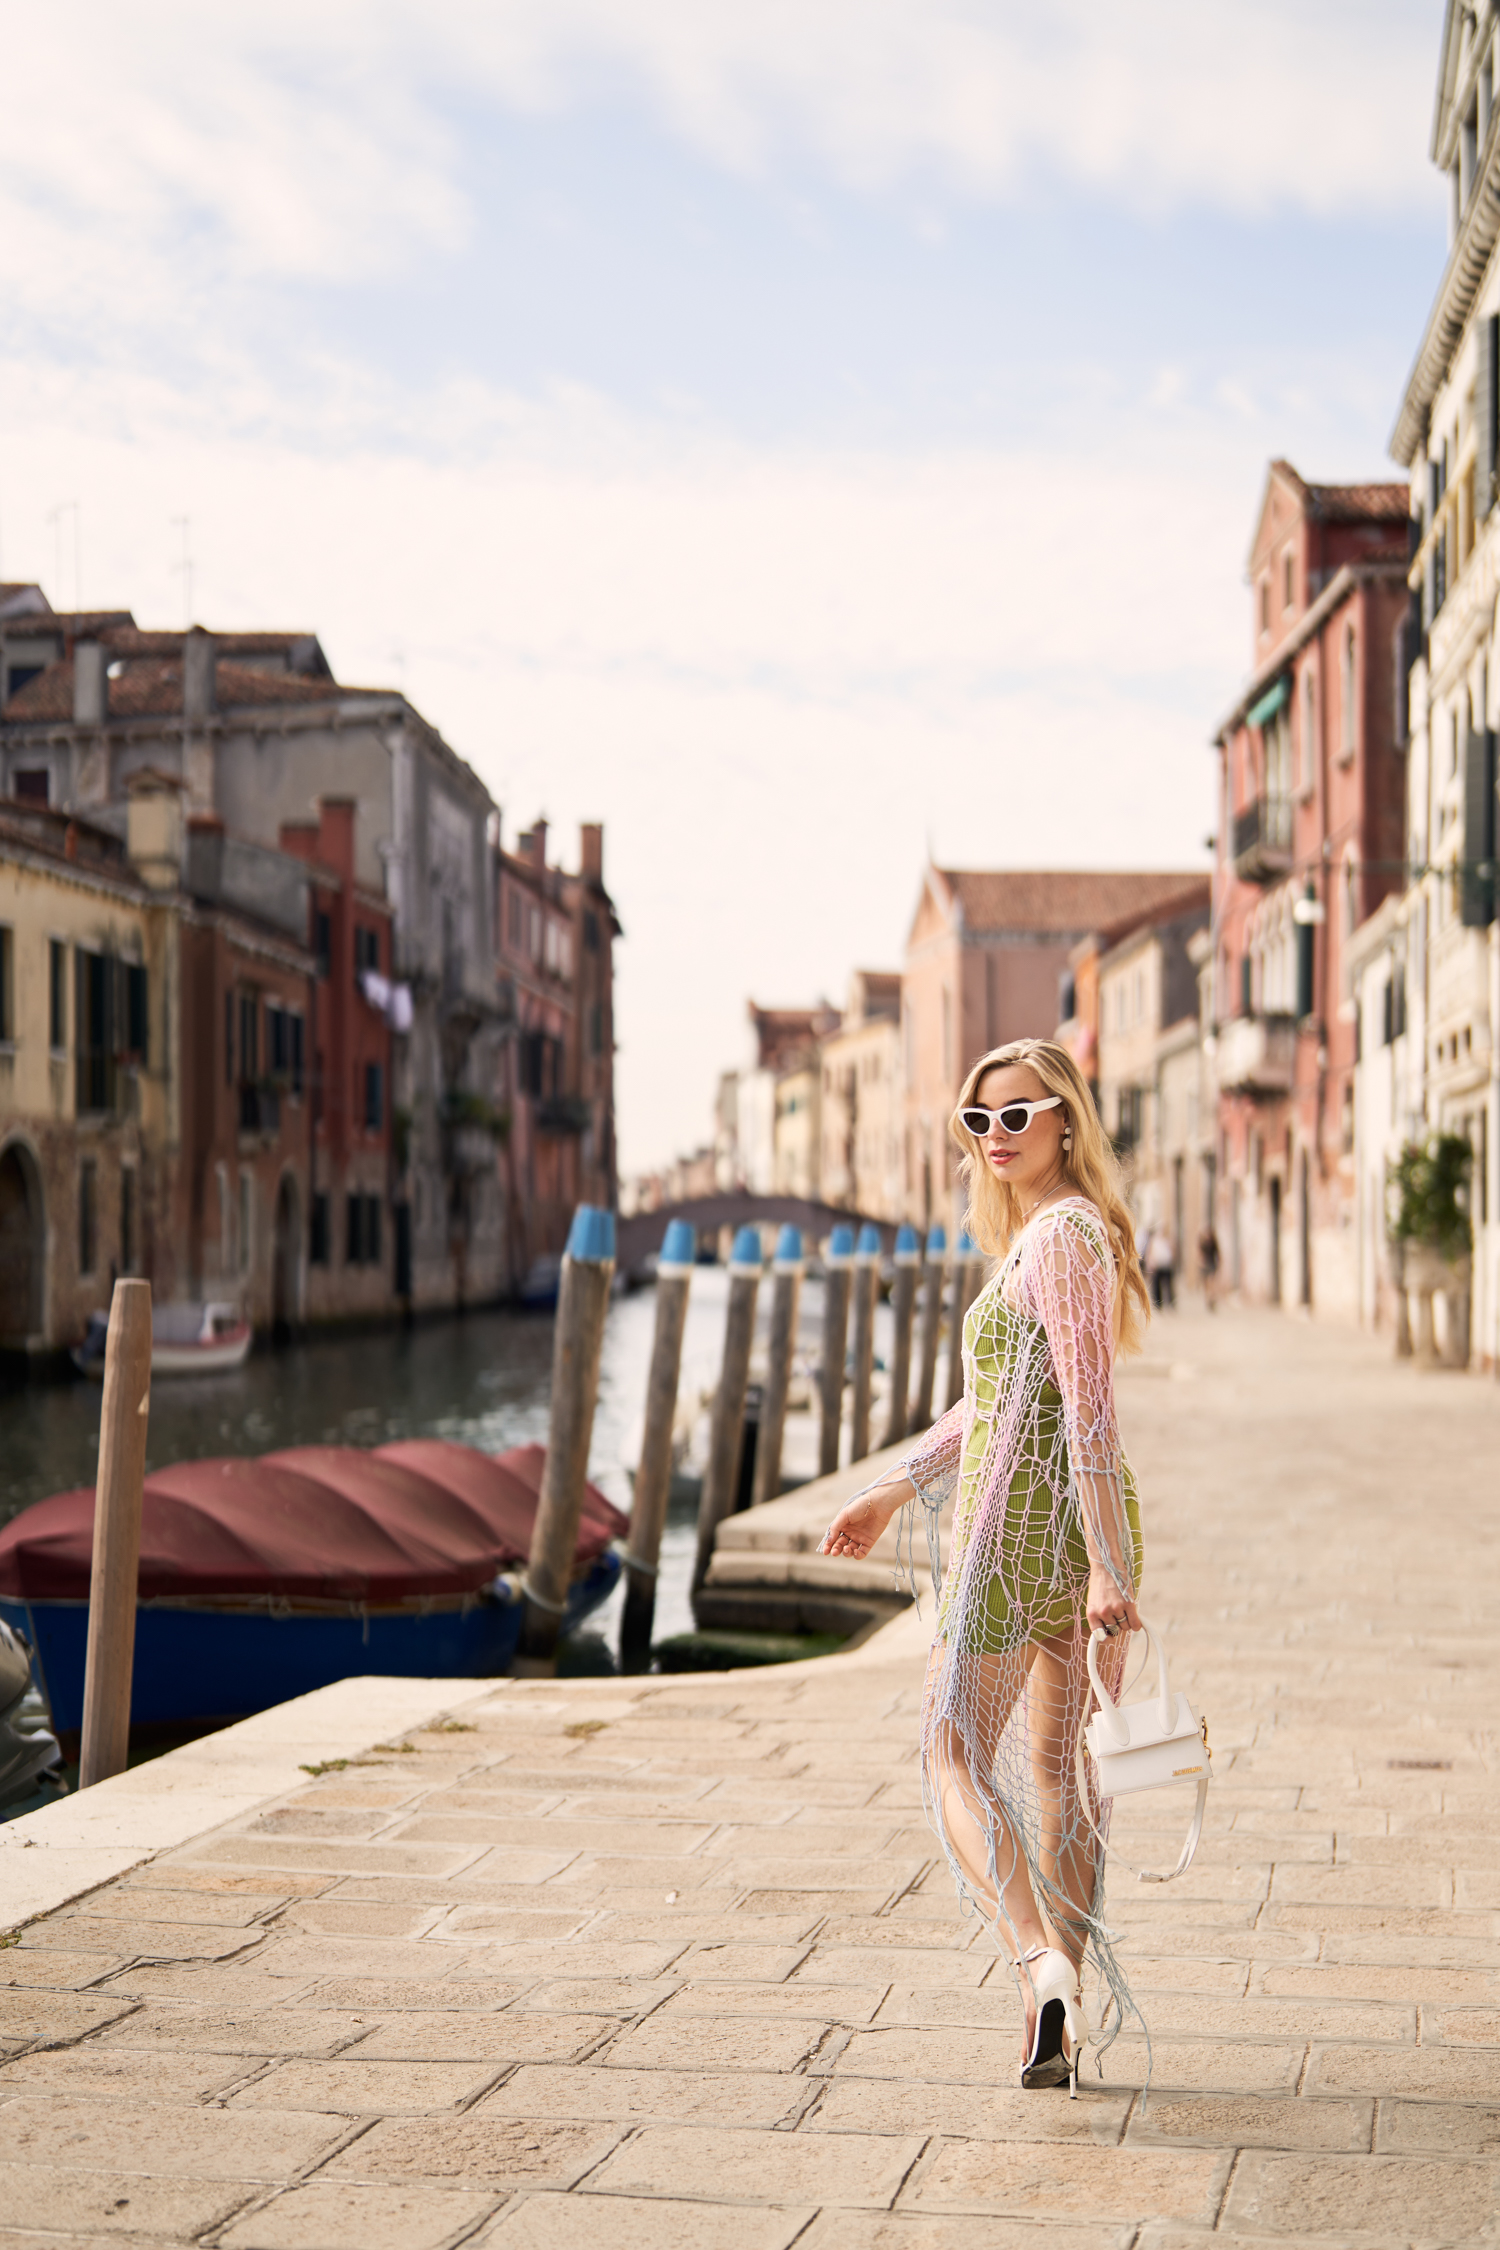 Poses and locations for a portrait session in Venice